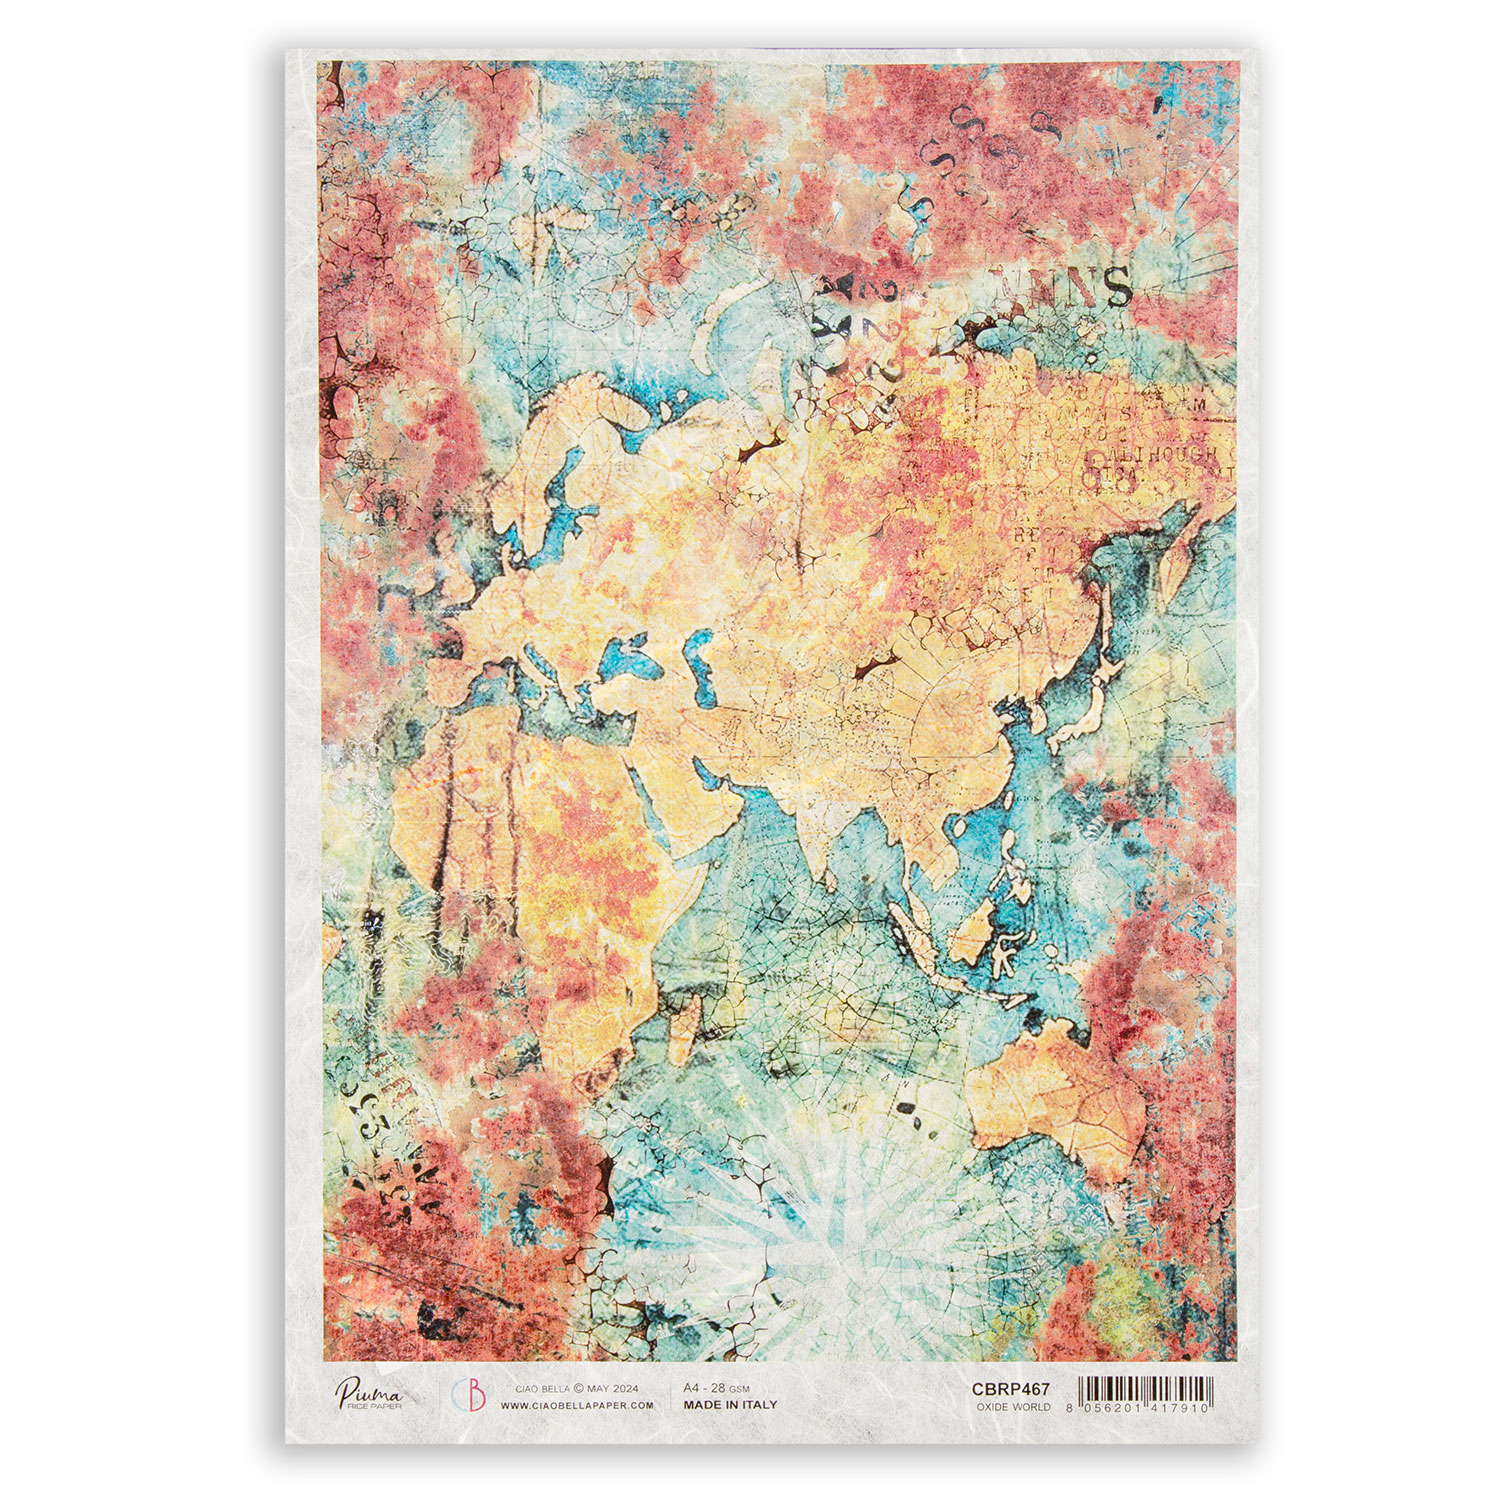 Ciao Bella 5 x Coral Reef A4 Rice Paper - Choose any 5 - Oxide World 